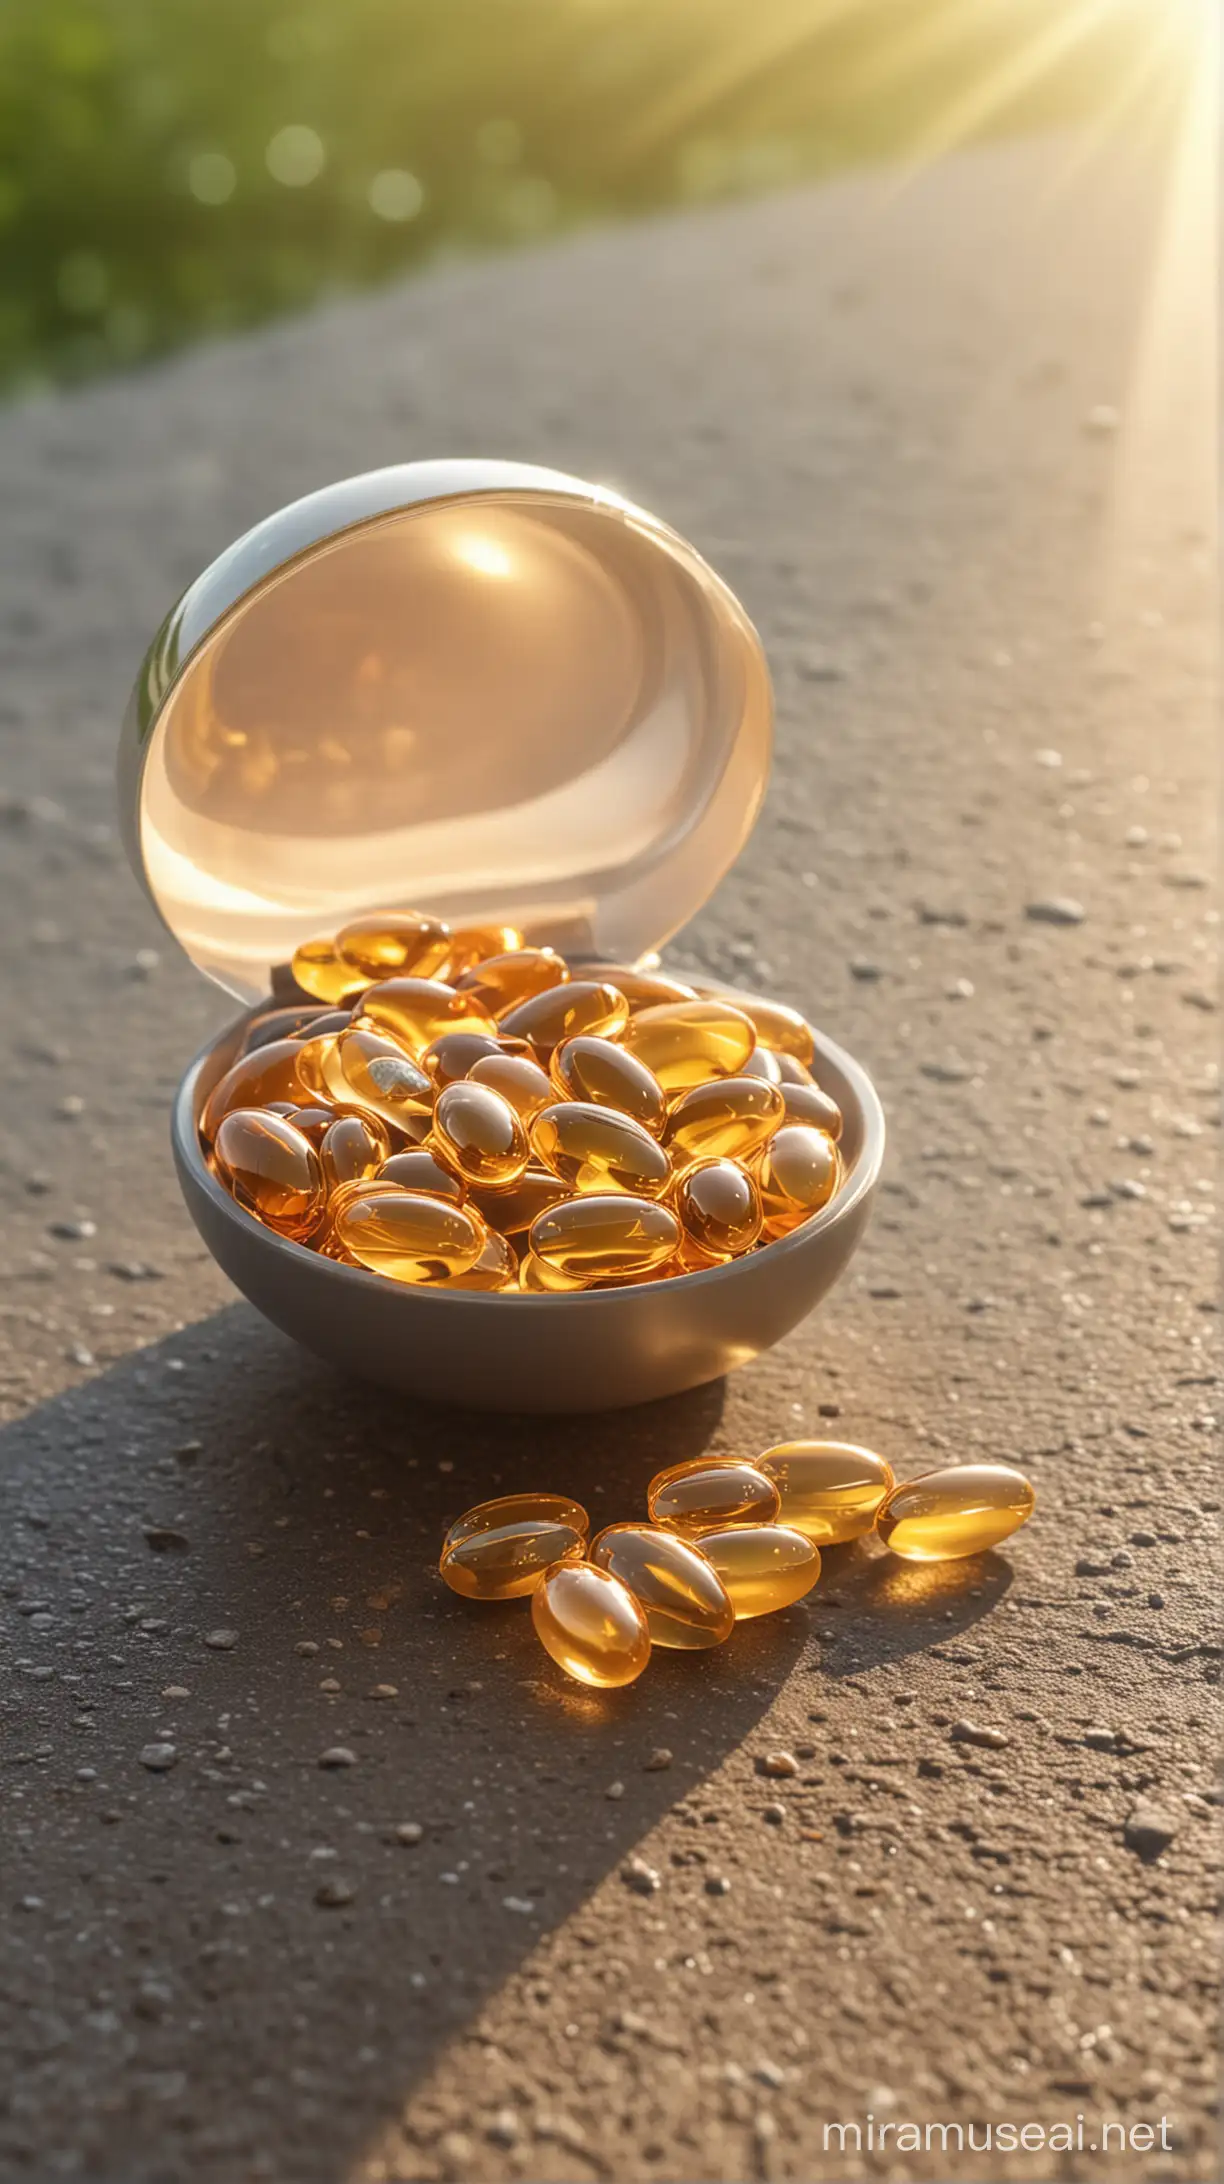 omega 3 capsule on table, natural background, sun light effect, 4k, HDR, morning time weather
